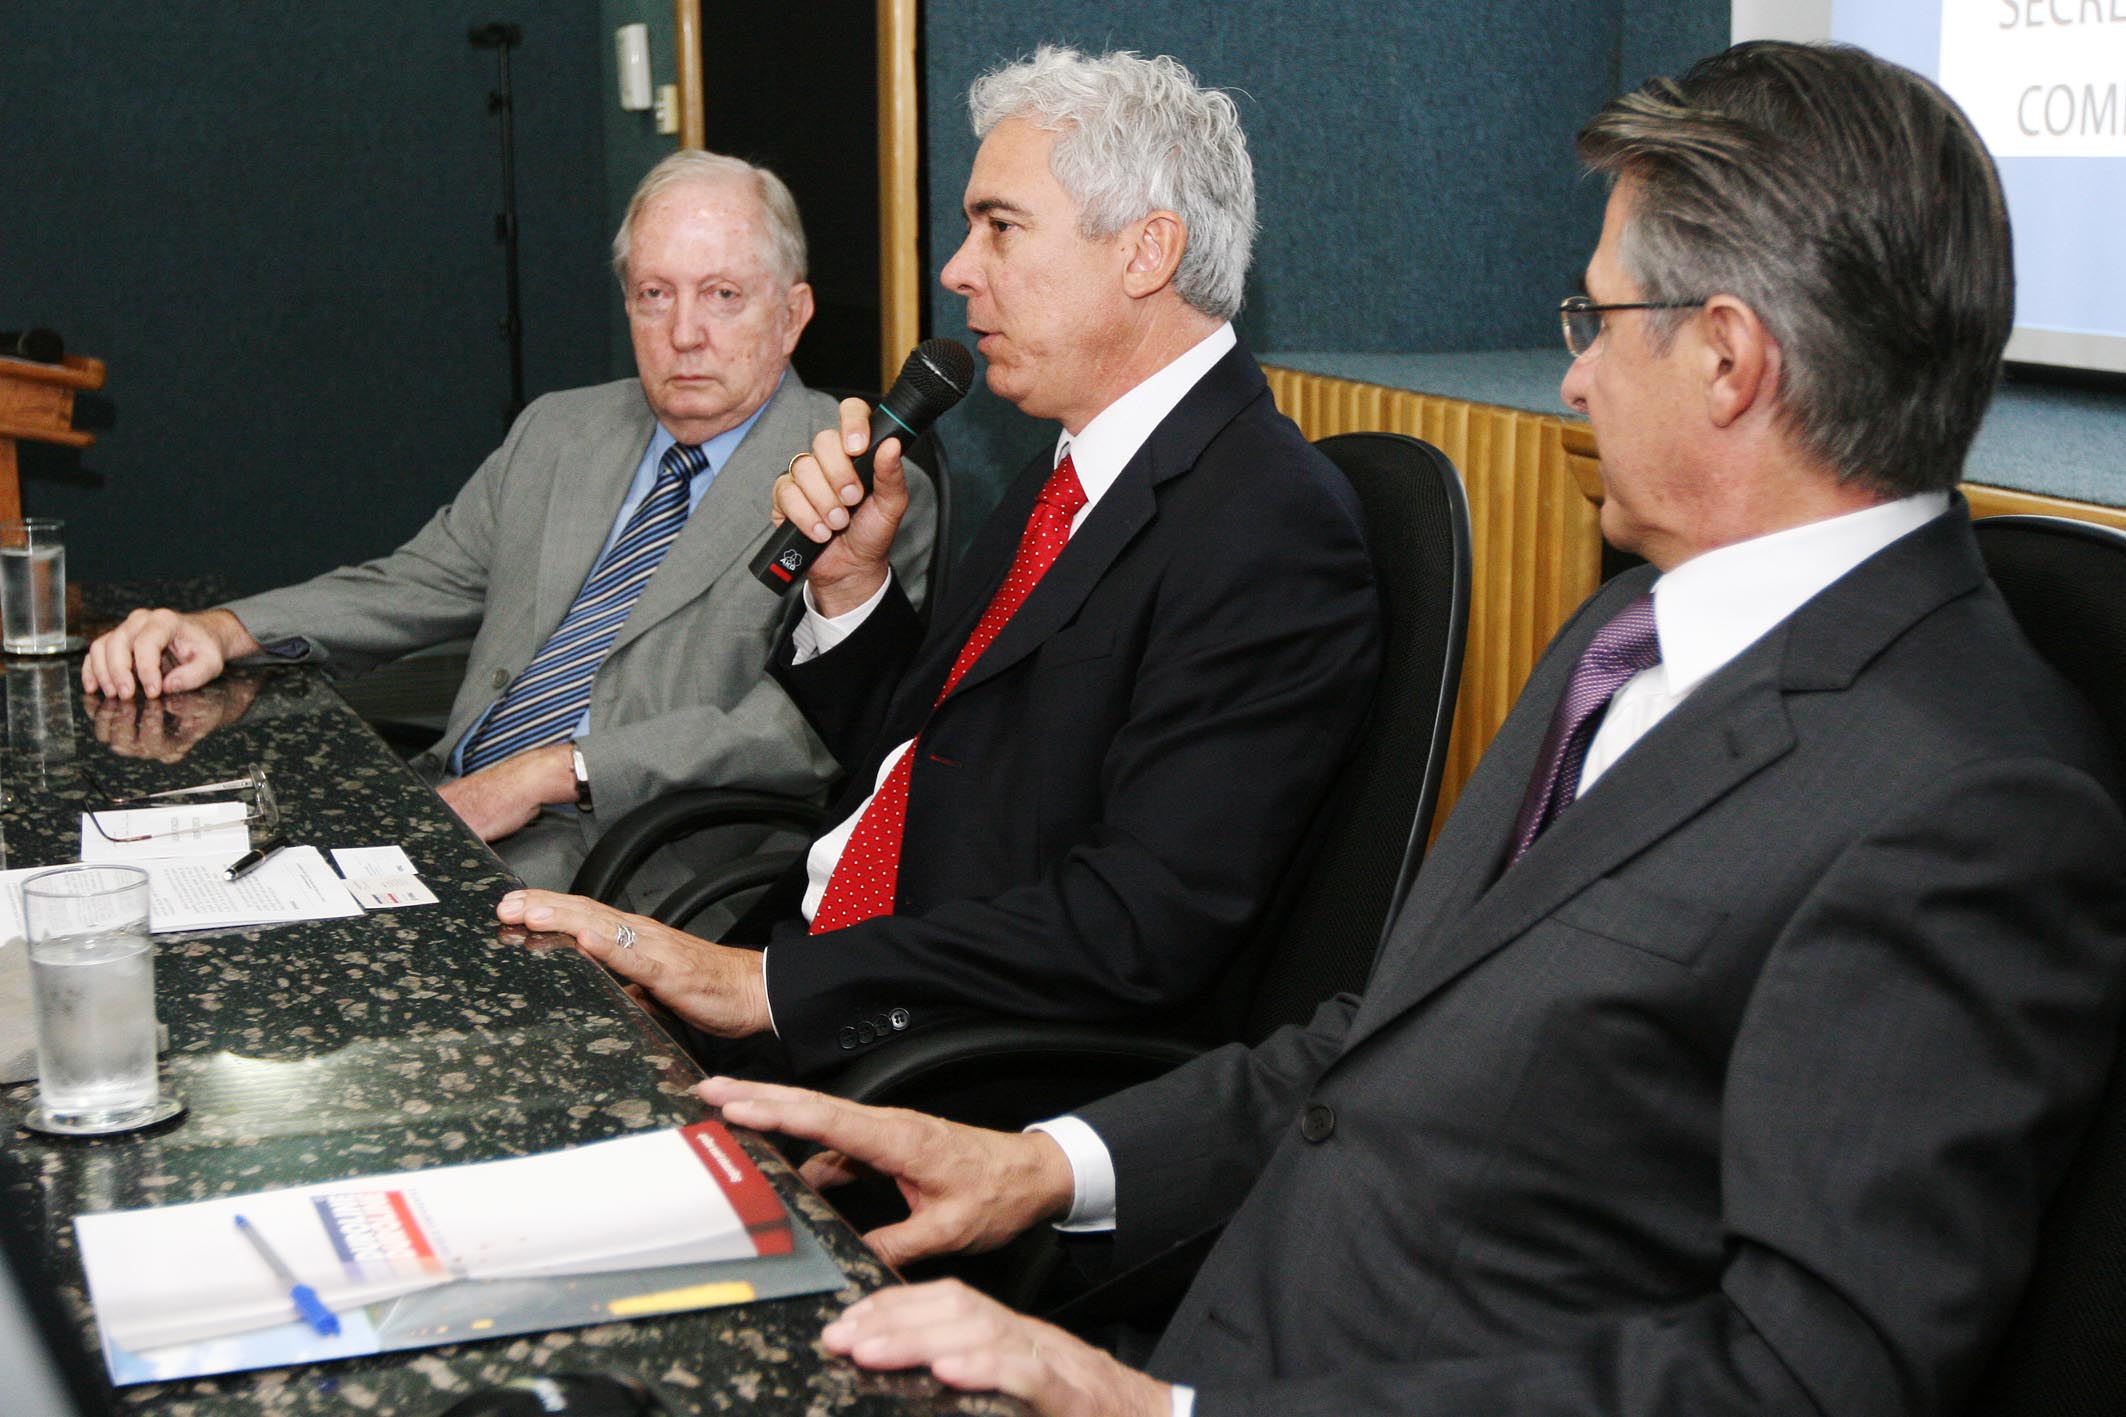 four men seated at a table with microphones and books